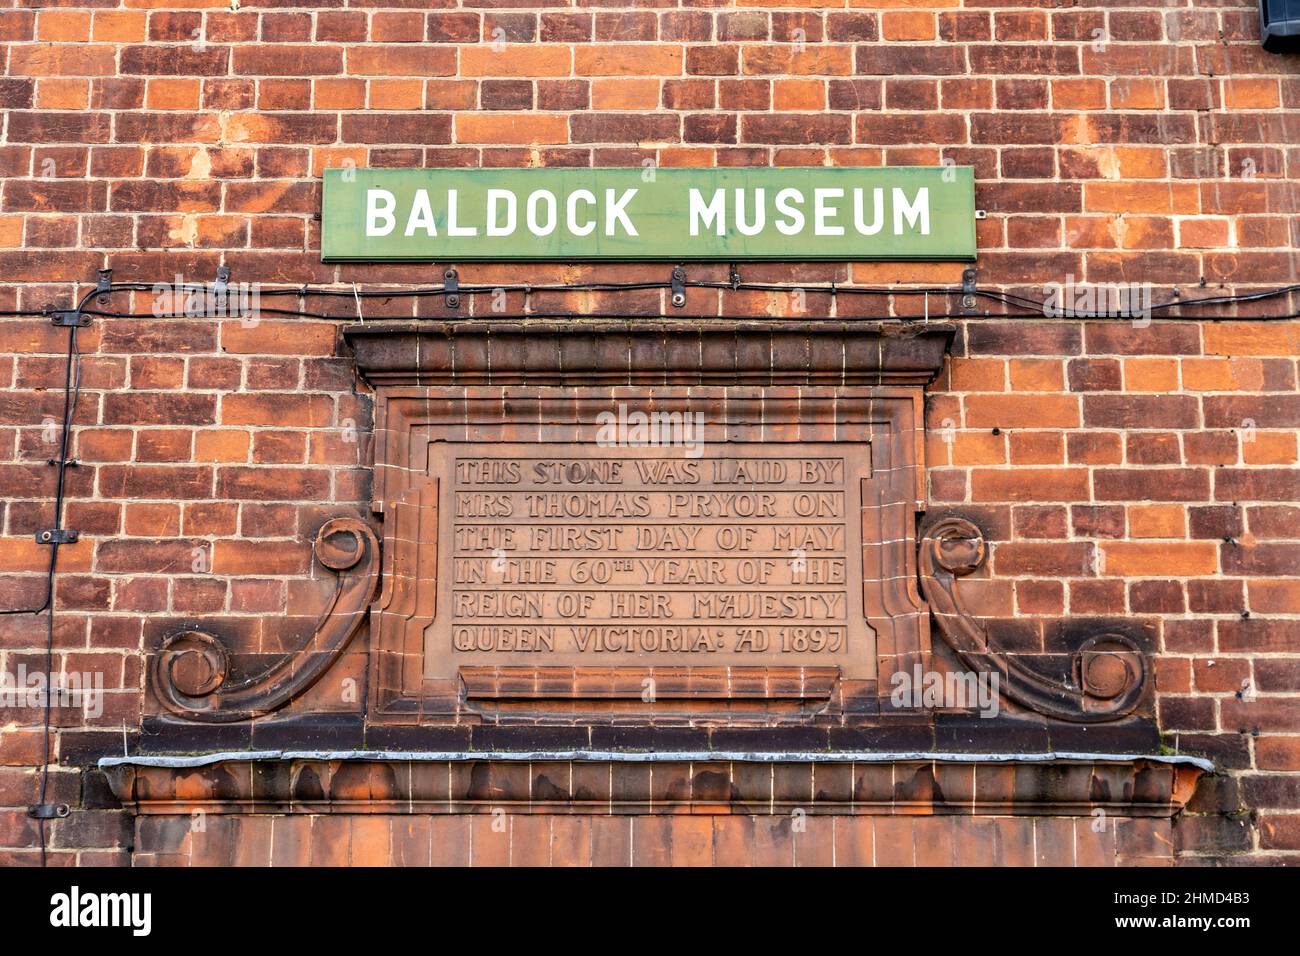 Sign for the Baldock Museum and commemoration of Queen Victoria's 60th year of reign on the facade to Baldock Town Hall, Baldock, Hertfordshire, UK Stock Photo